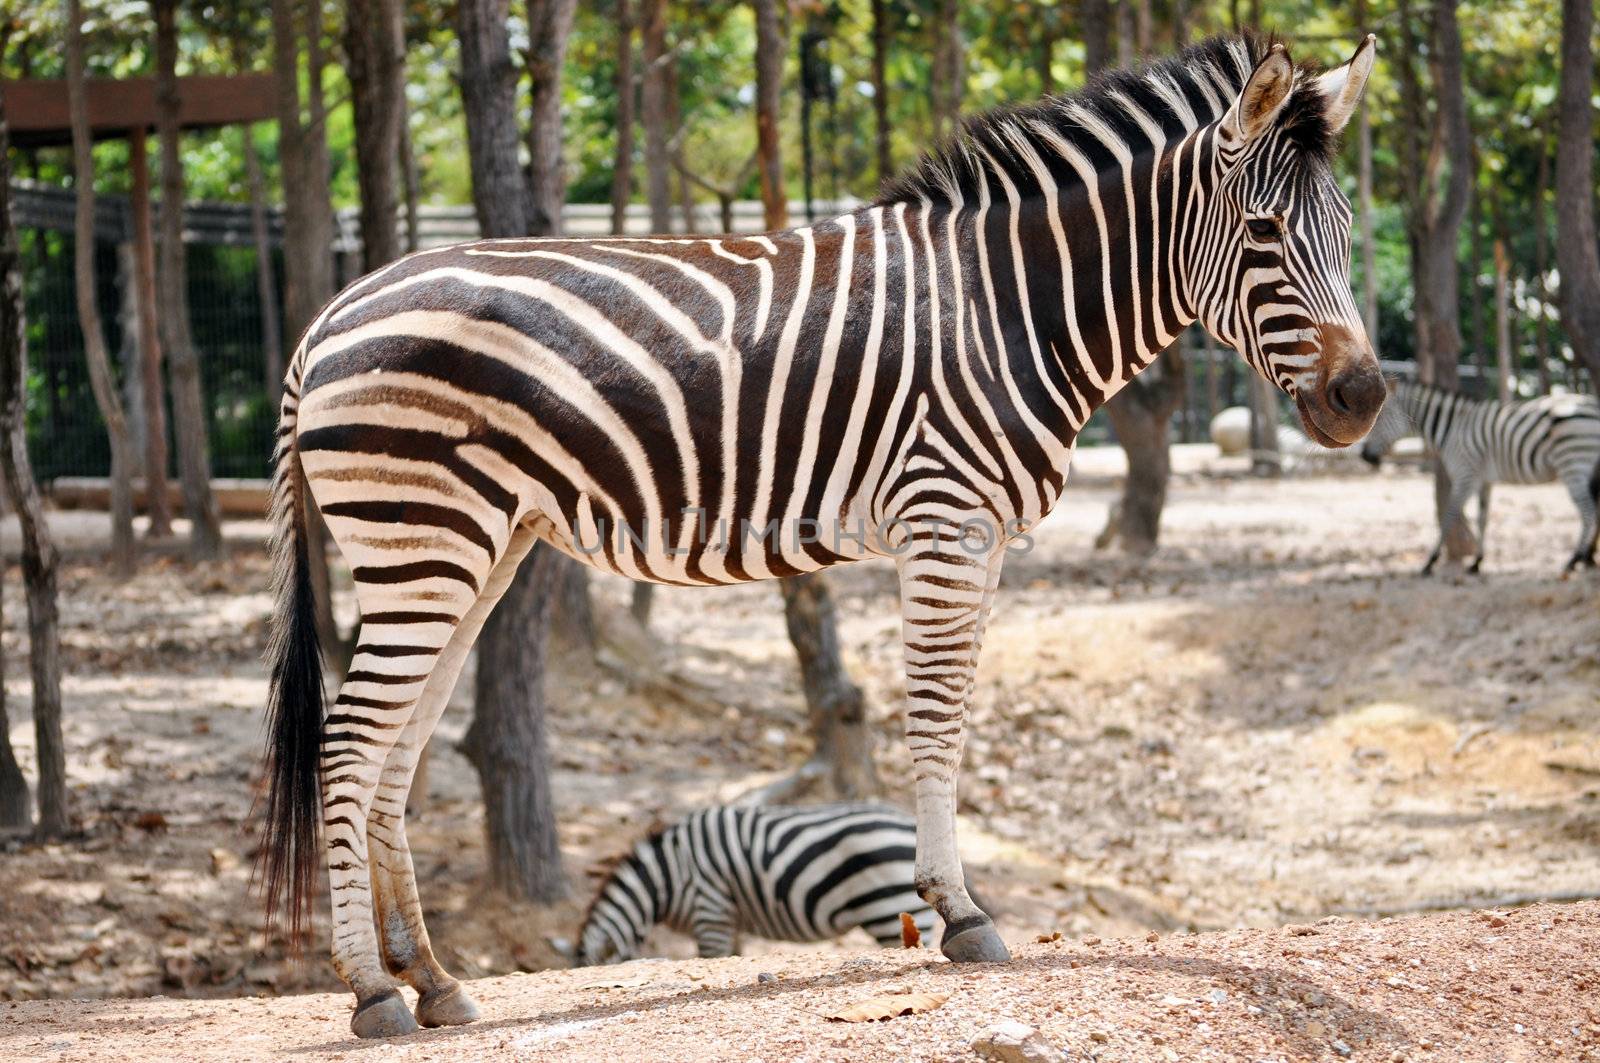 The unique stripes of zebras make these among the animals most familiar to people.